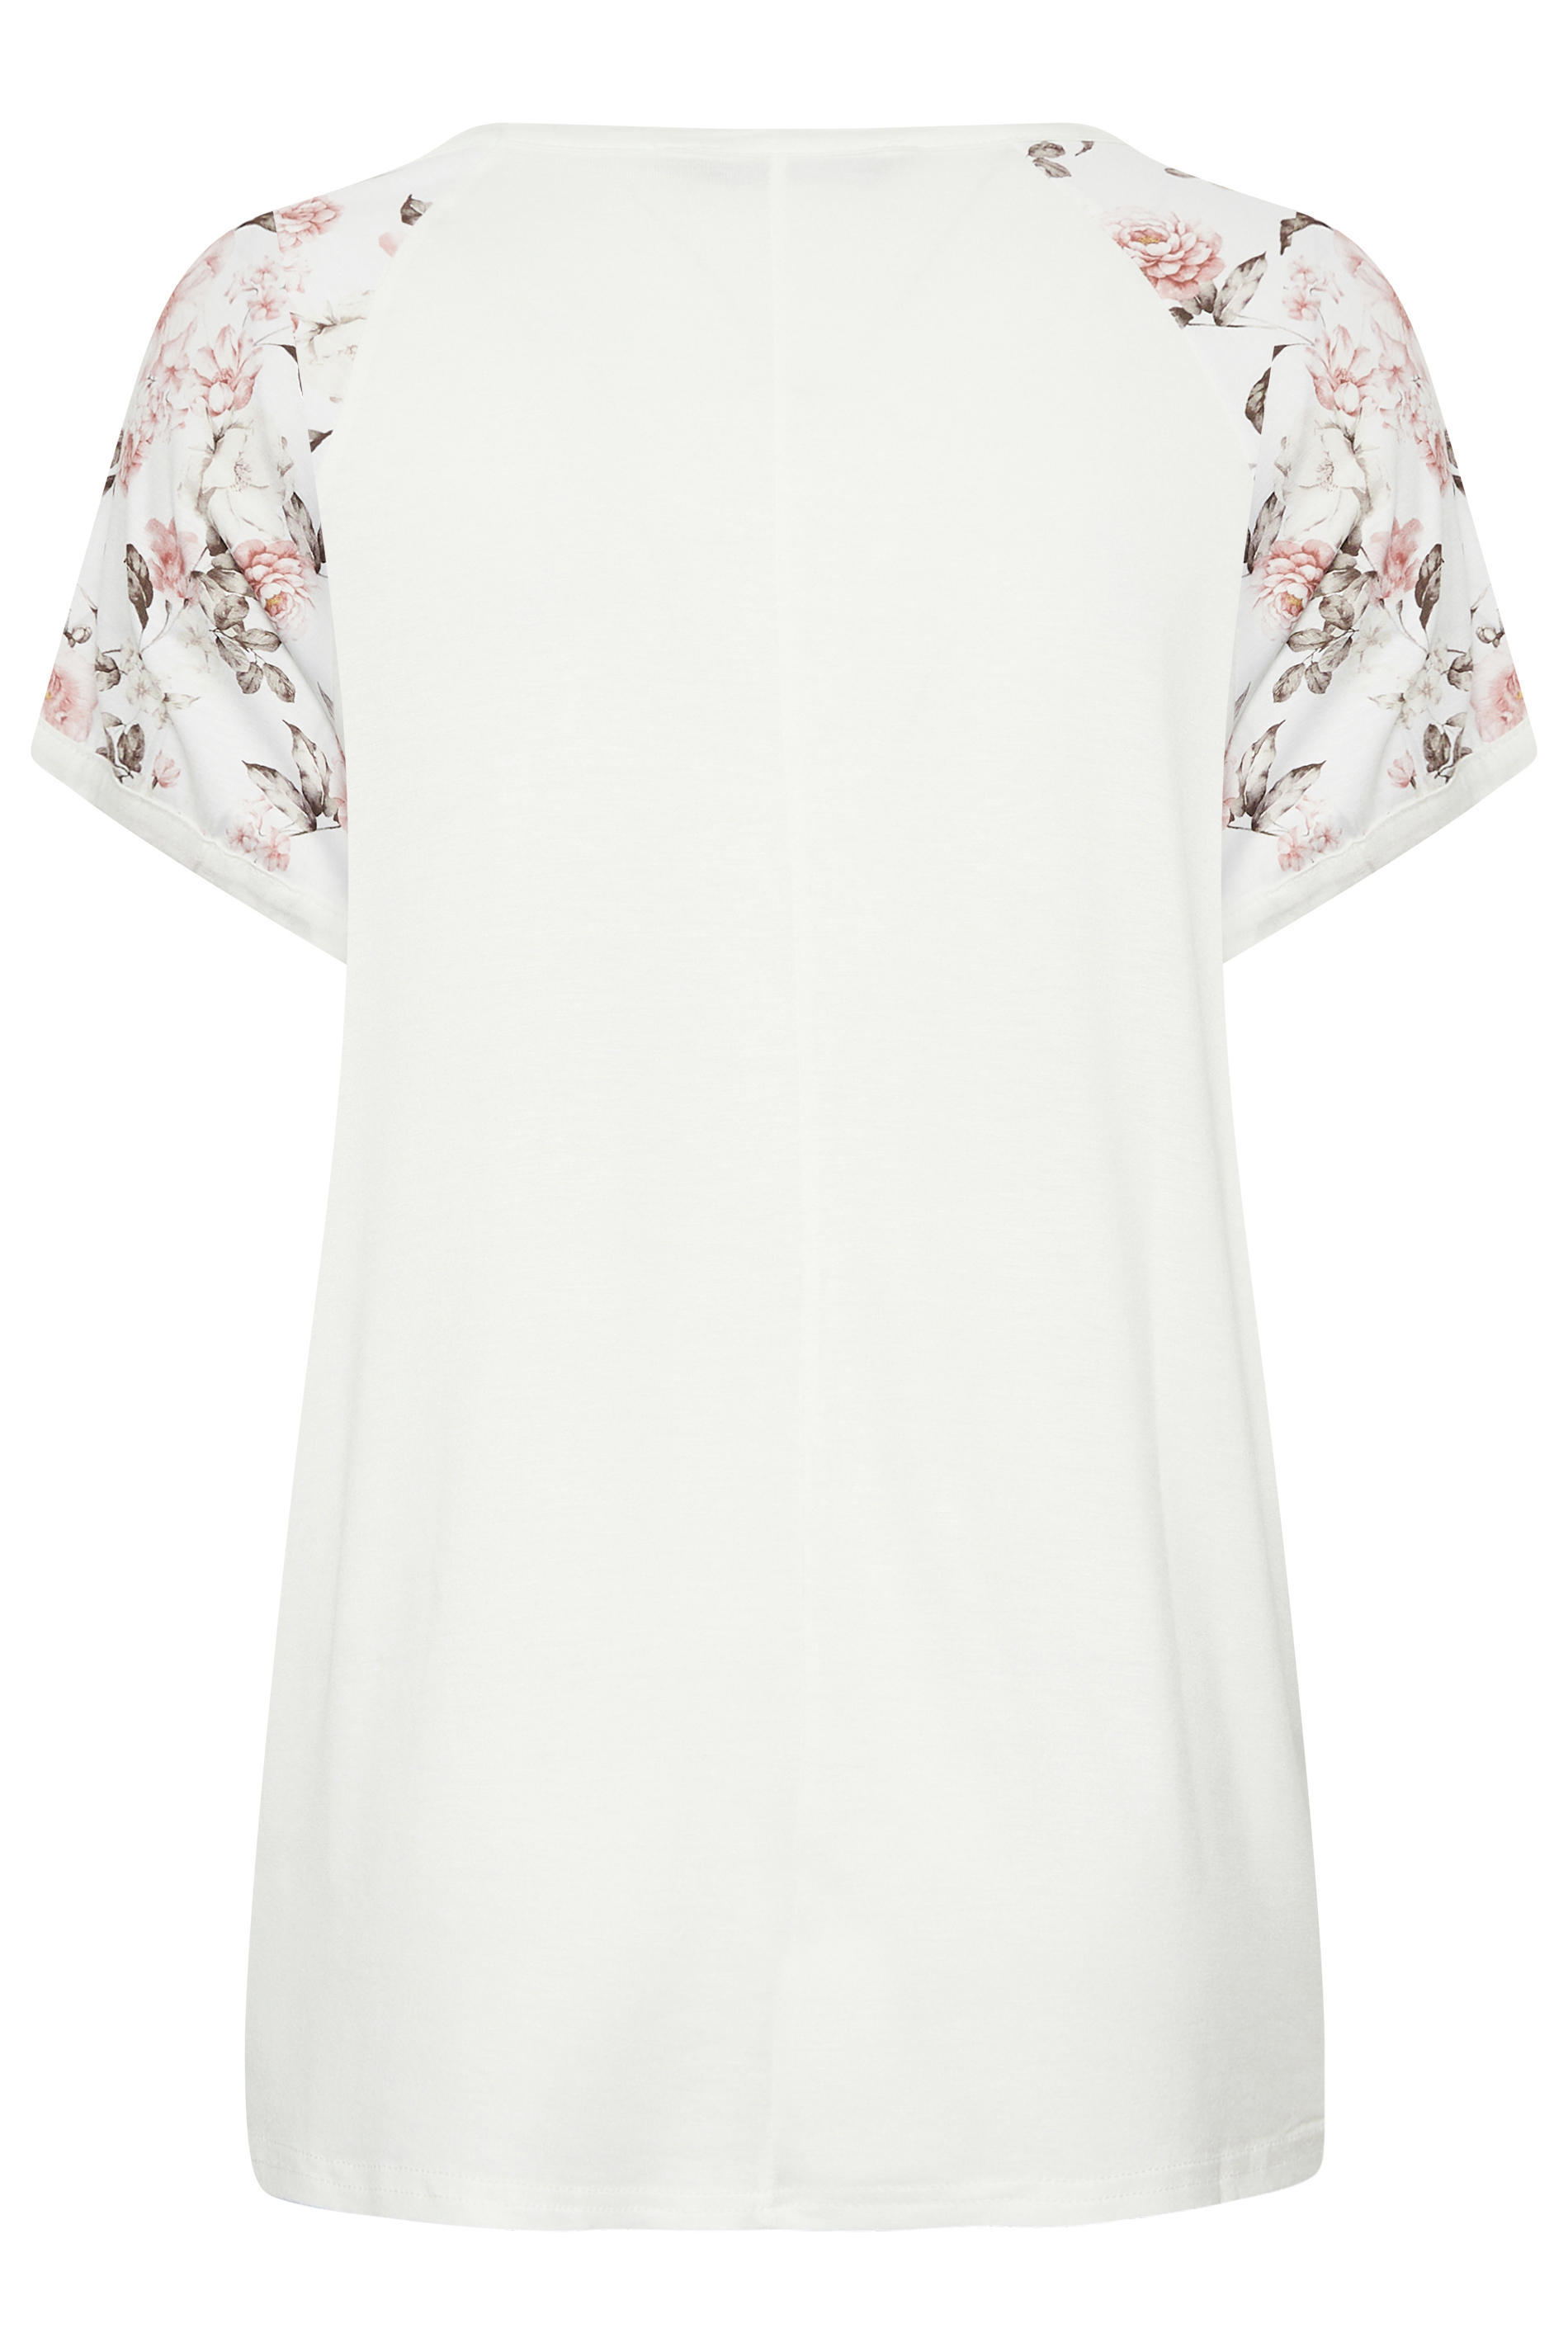 LIMITED COLLECTION Plus Size White Floral Print Short Sleeve T